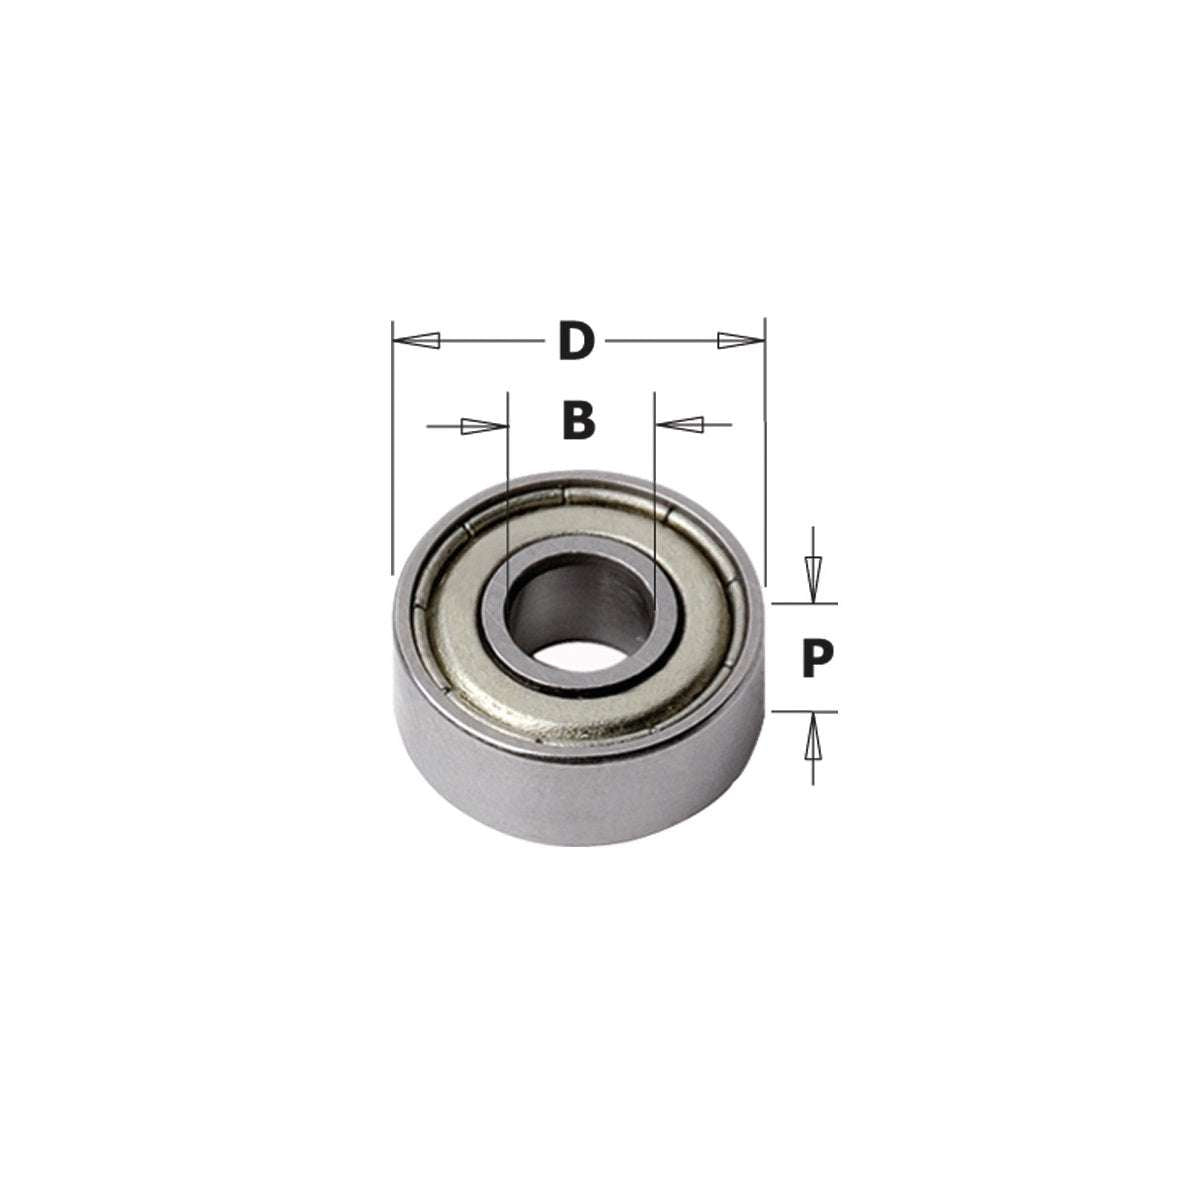 Replacement steel bearing for milling cutter, diameter 9,5 mm - CMT 791.002.00